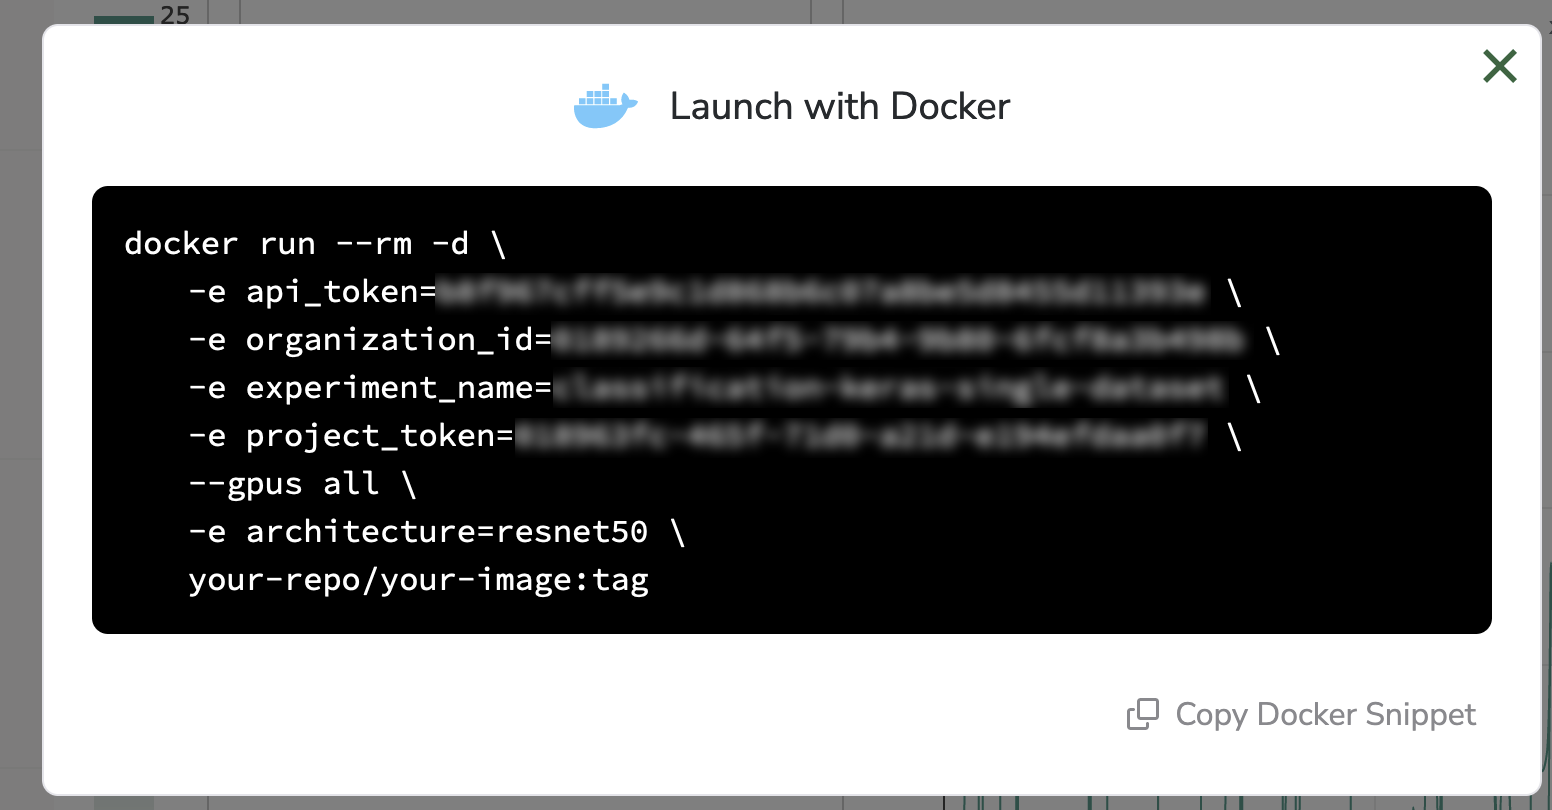 The Docker command to run on your environment